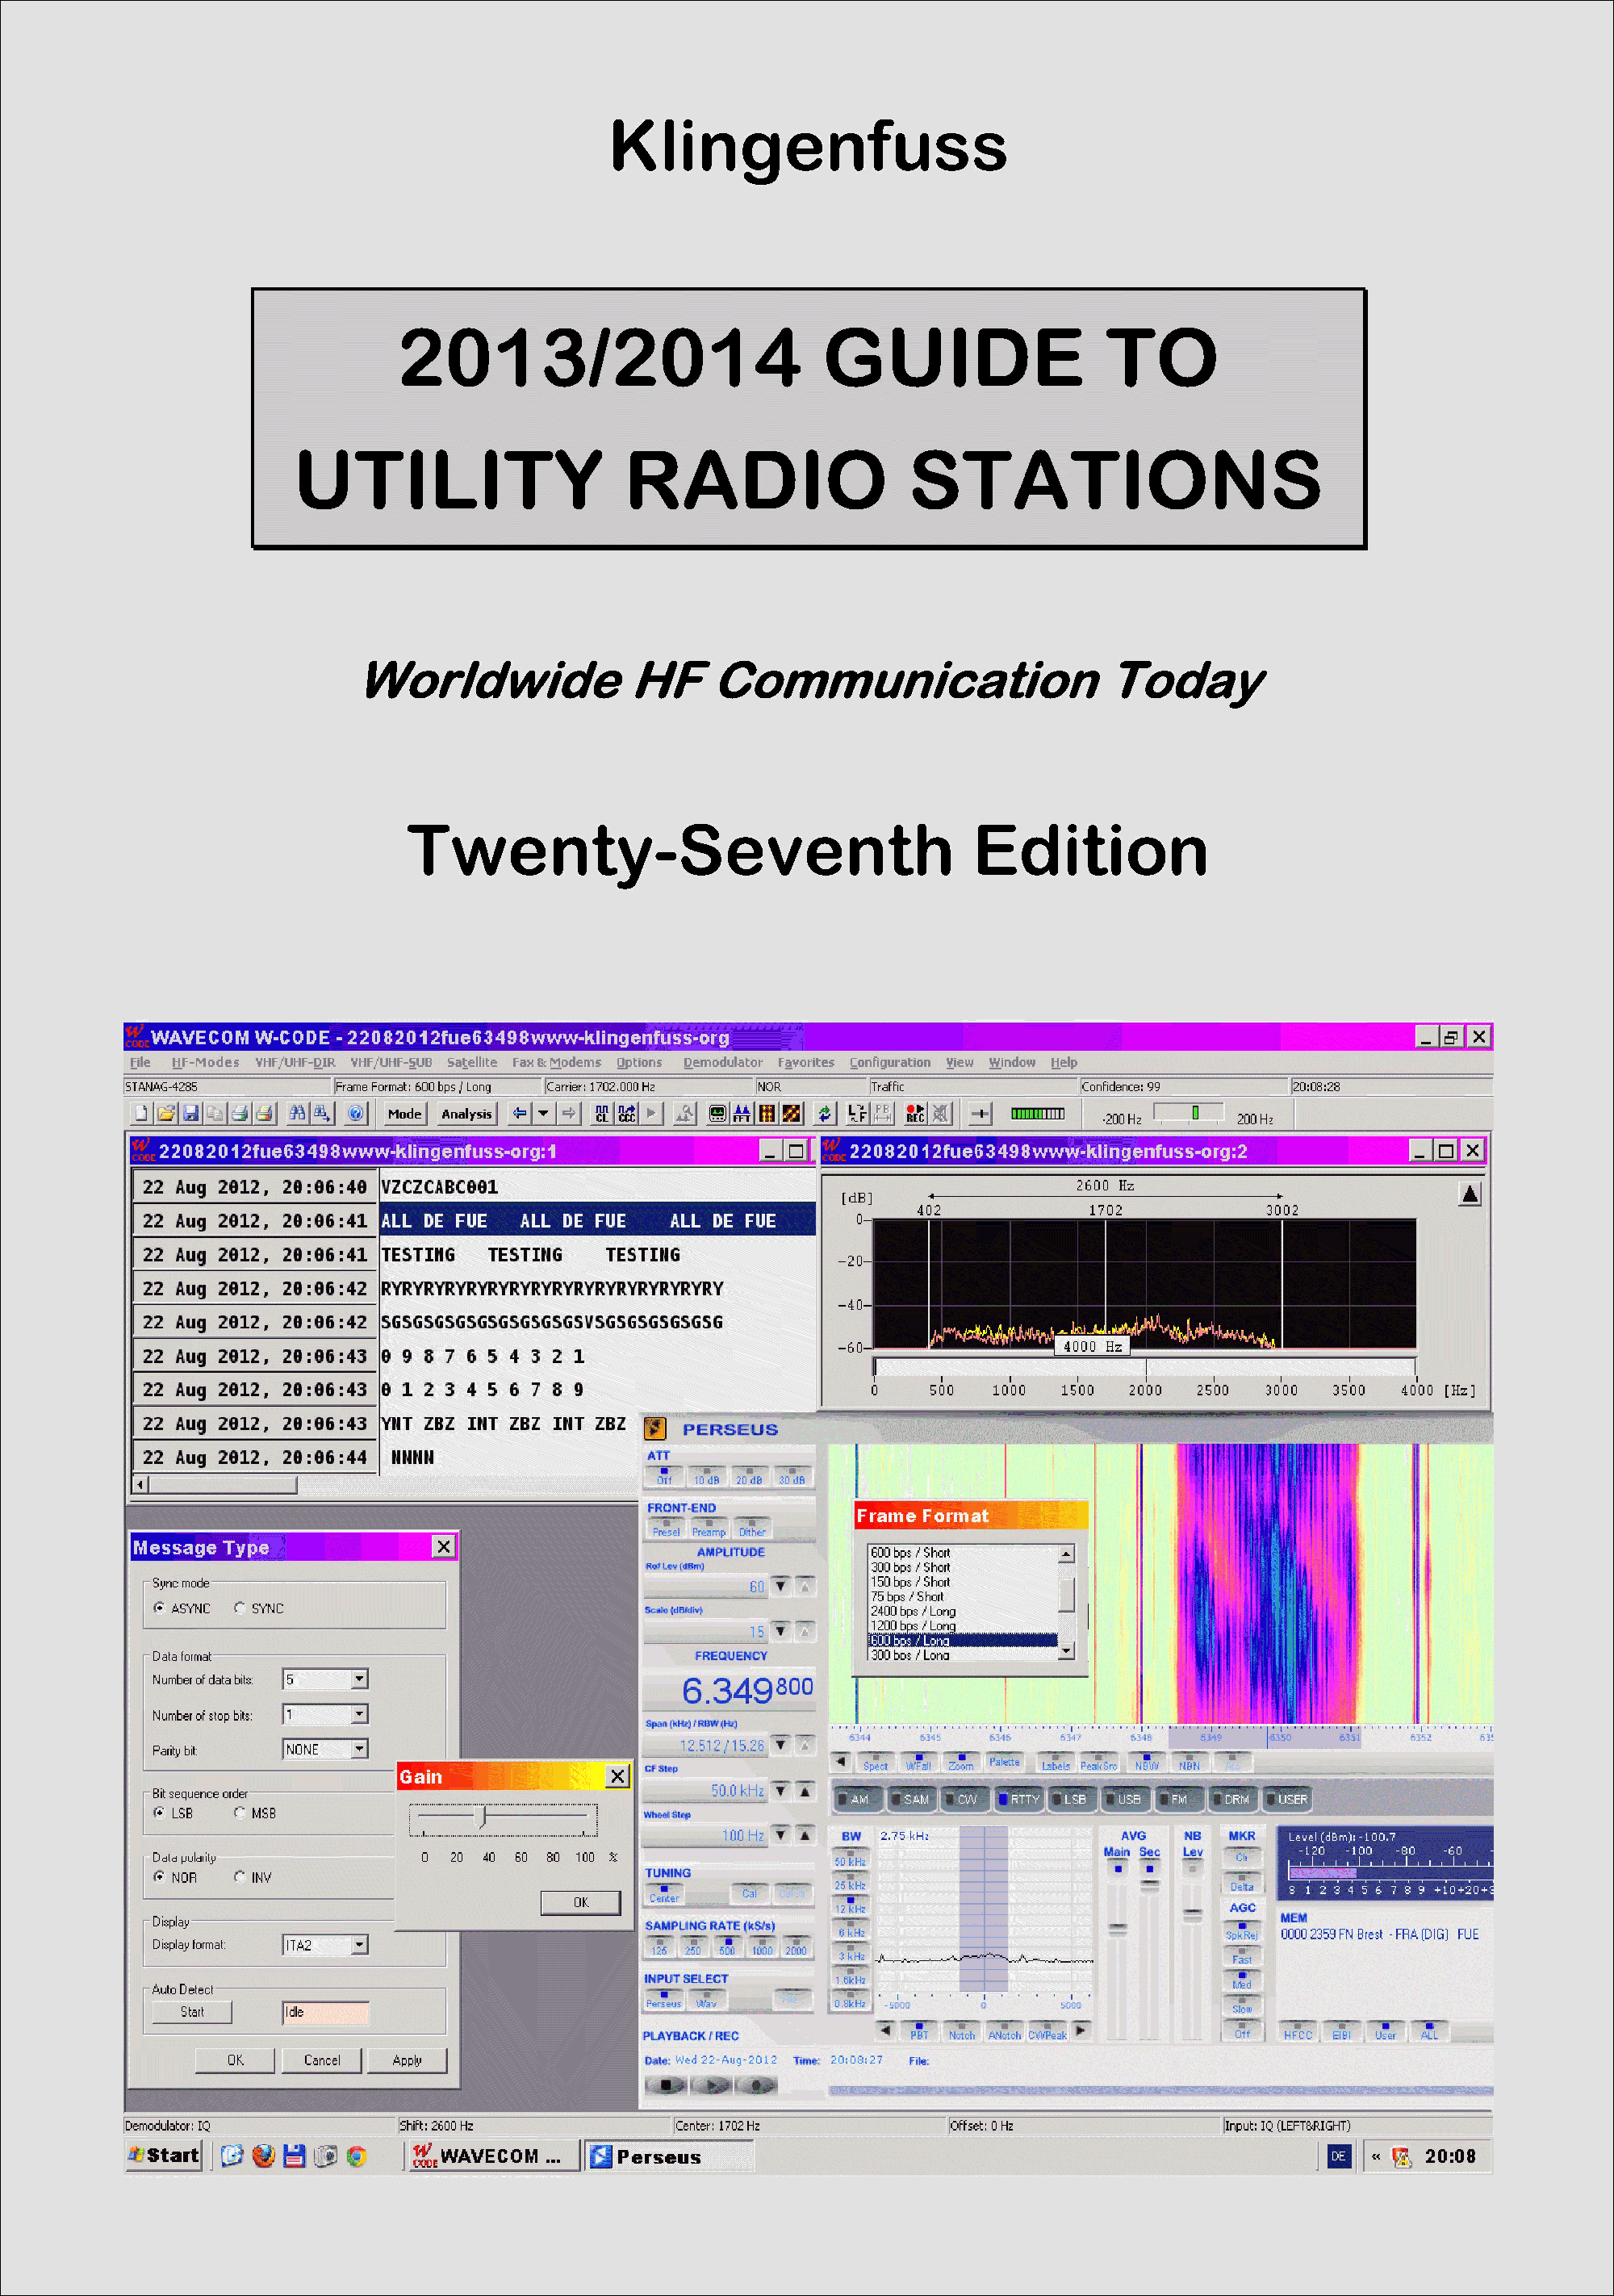 2013/2014 Guide to Utility Radio Stations 27th Edition